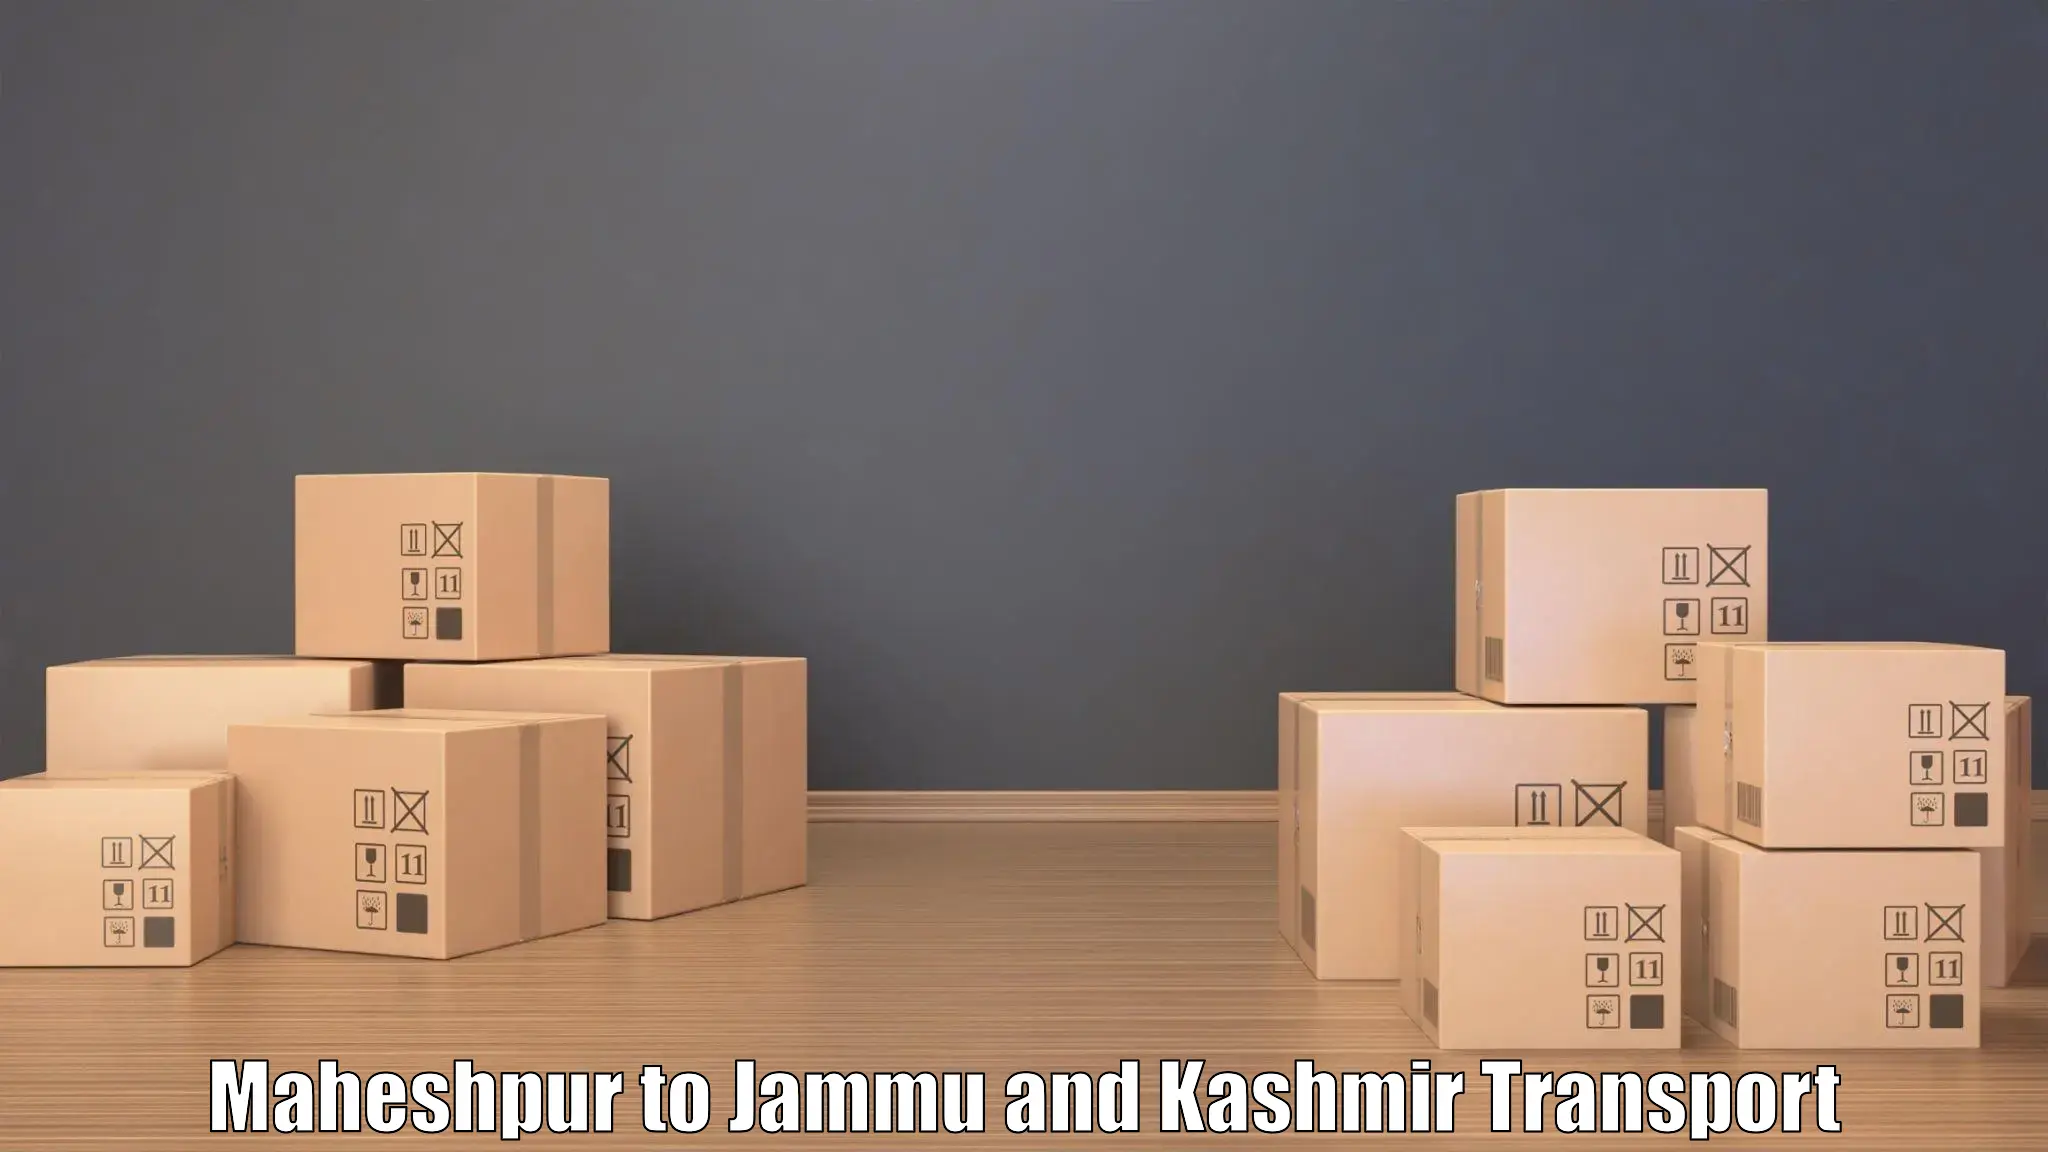 Road transport online services in Maheshpur to Jammu and Kashmir